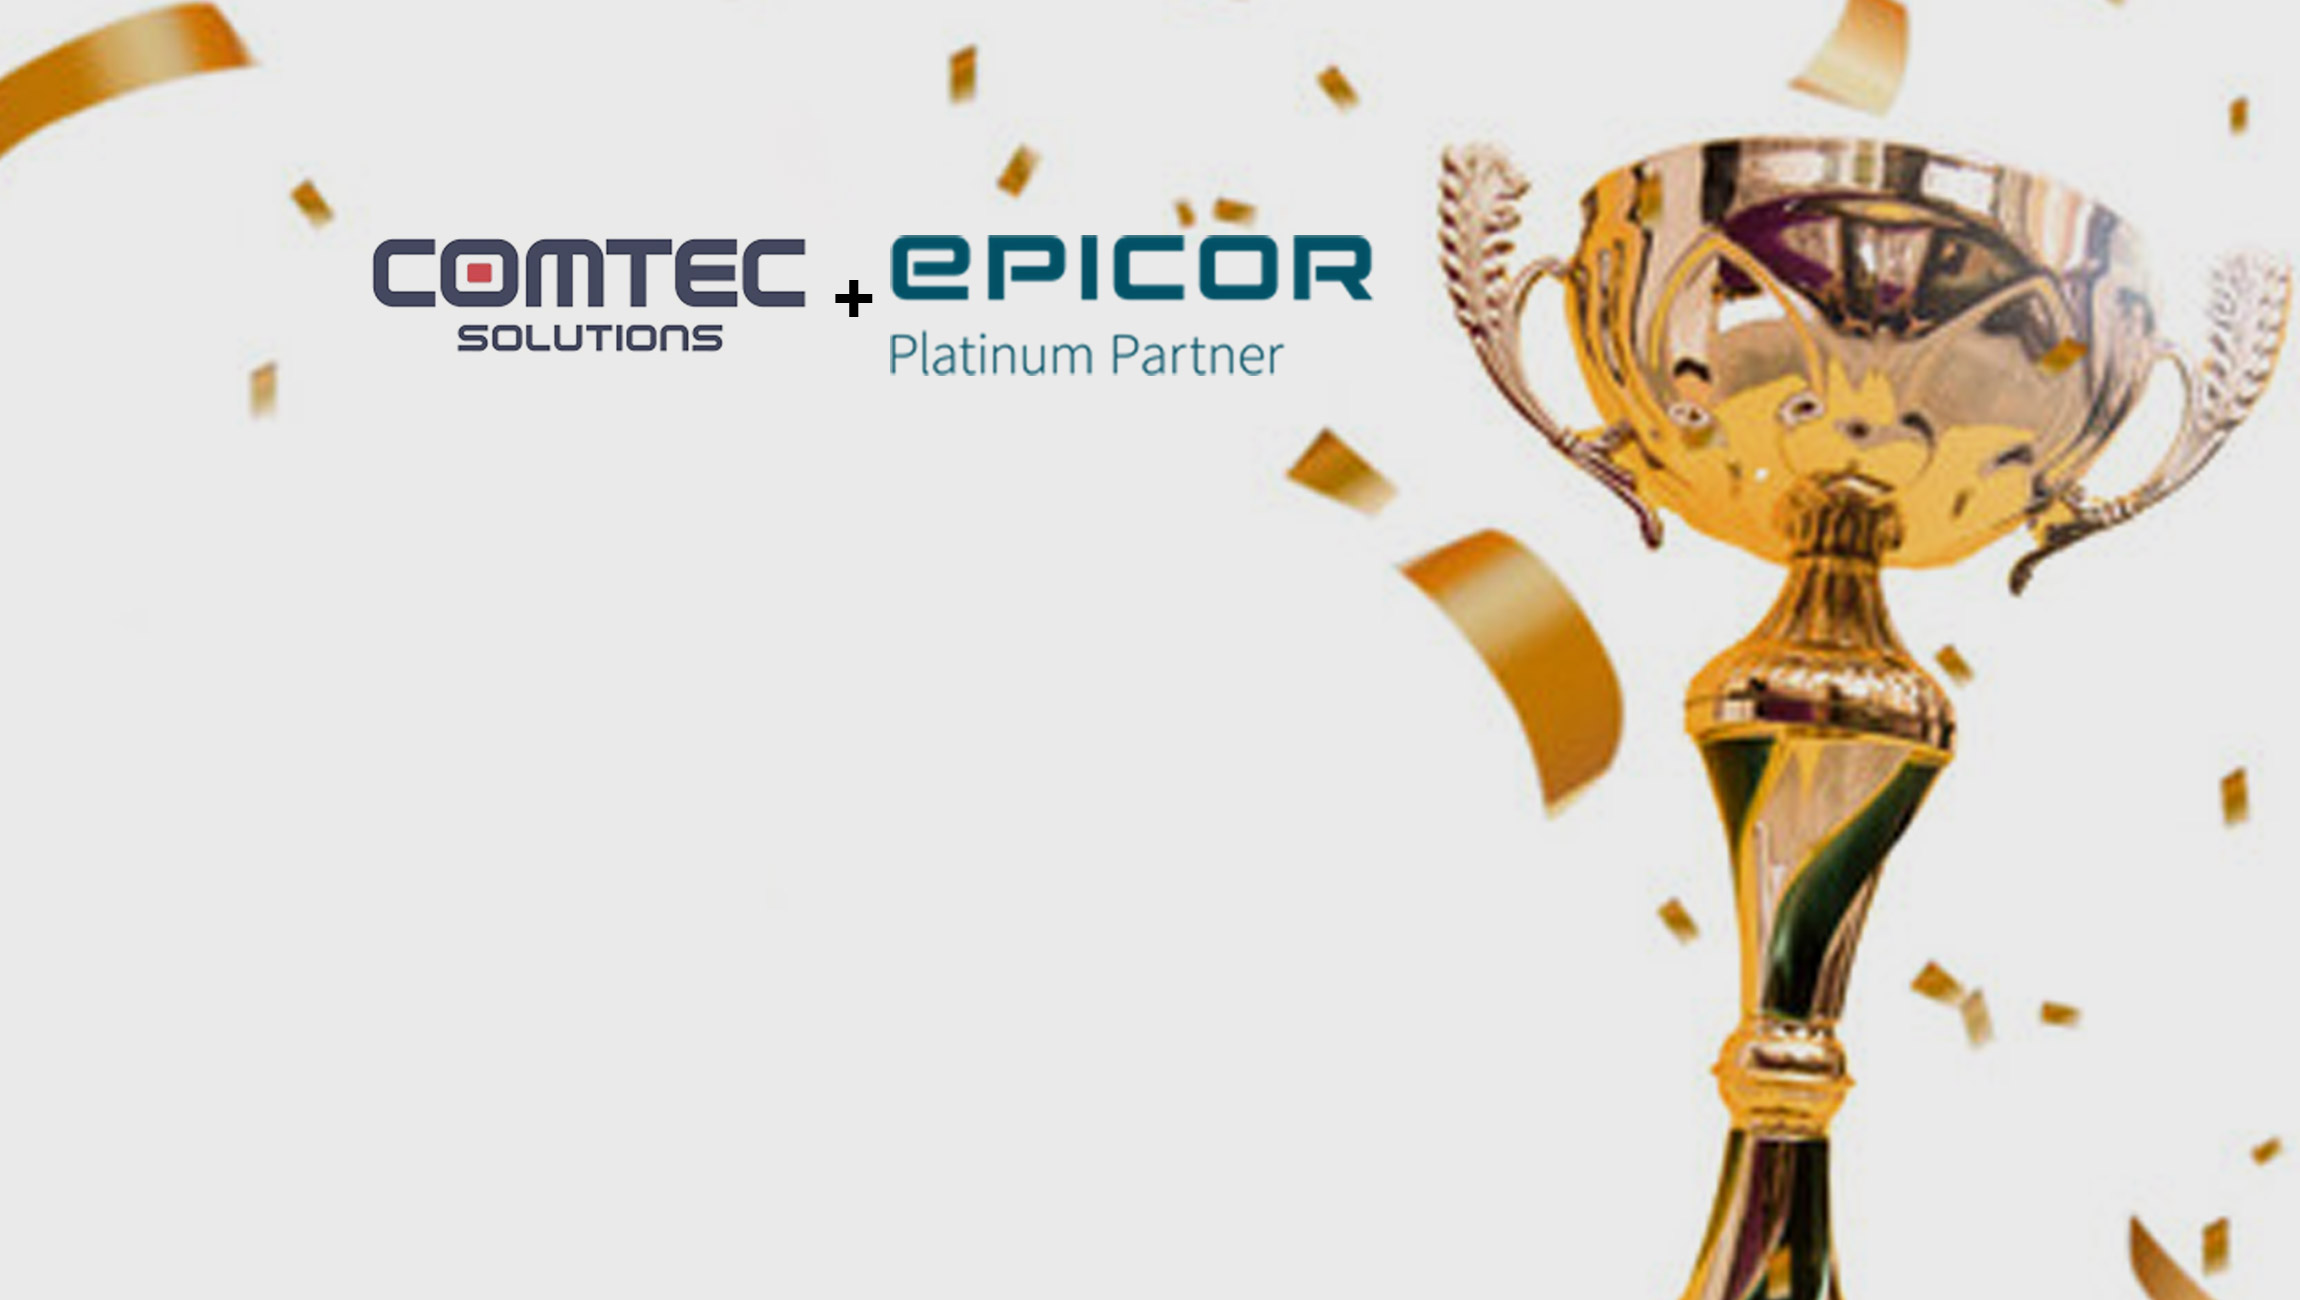 ComTec Solutions Recognized by Epicor as a Platinum Partner in Annual Partner Program Awards